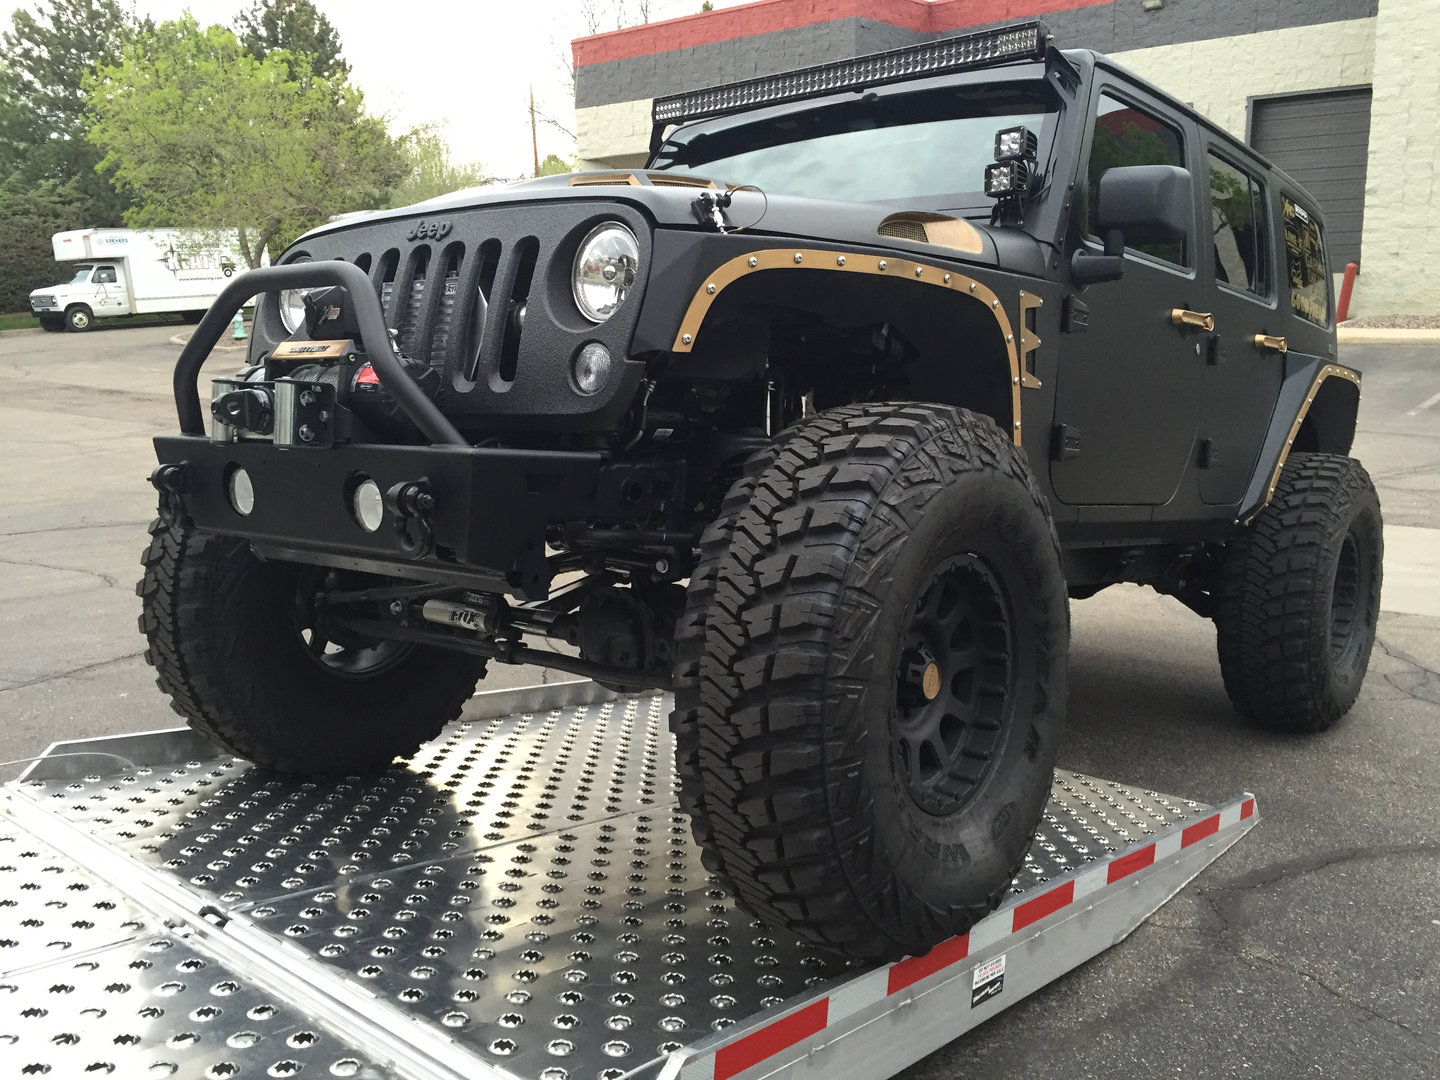 Luxe Offroad custom vehicle modification to a Jeep.